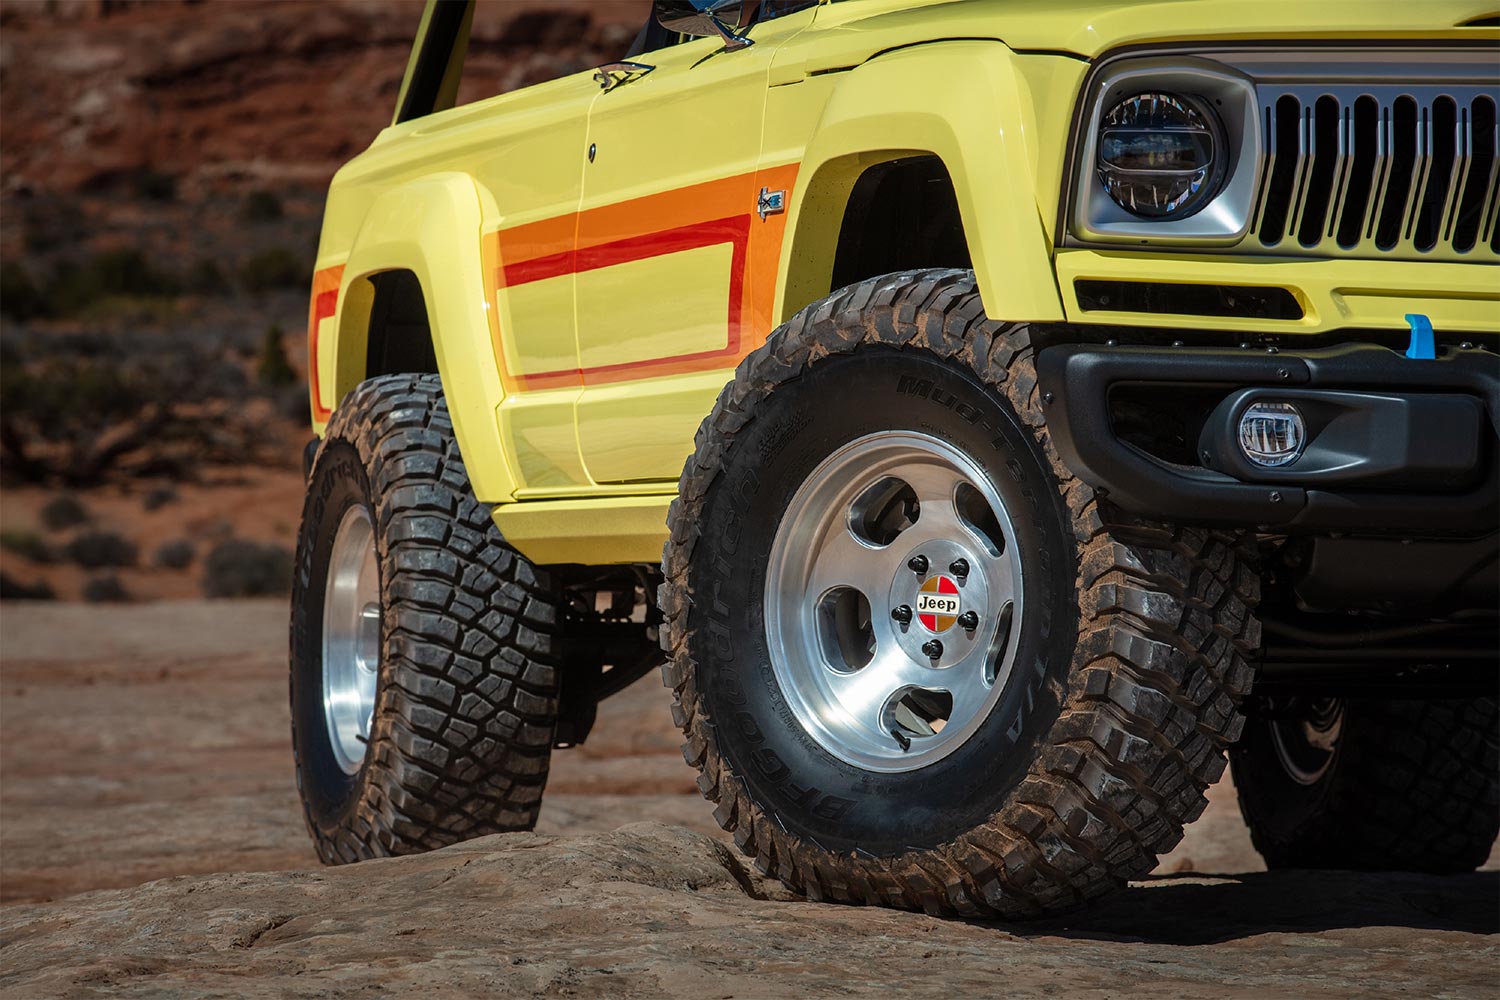 The 37-inch tires on the 1978 Jeep Cherokee 4xe Concept for the 2023 Easter Jeep Safari